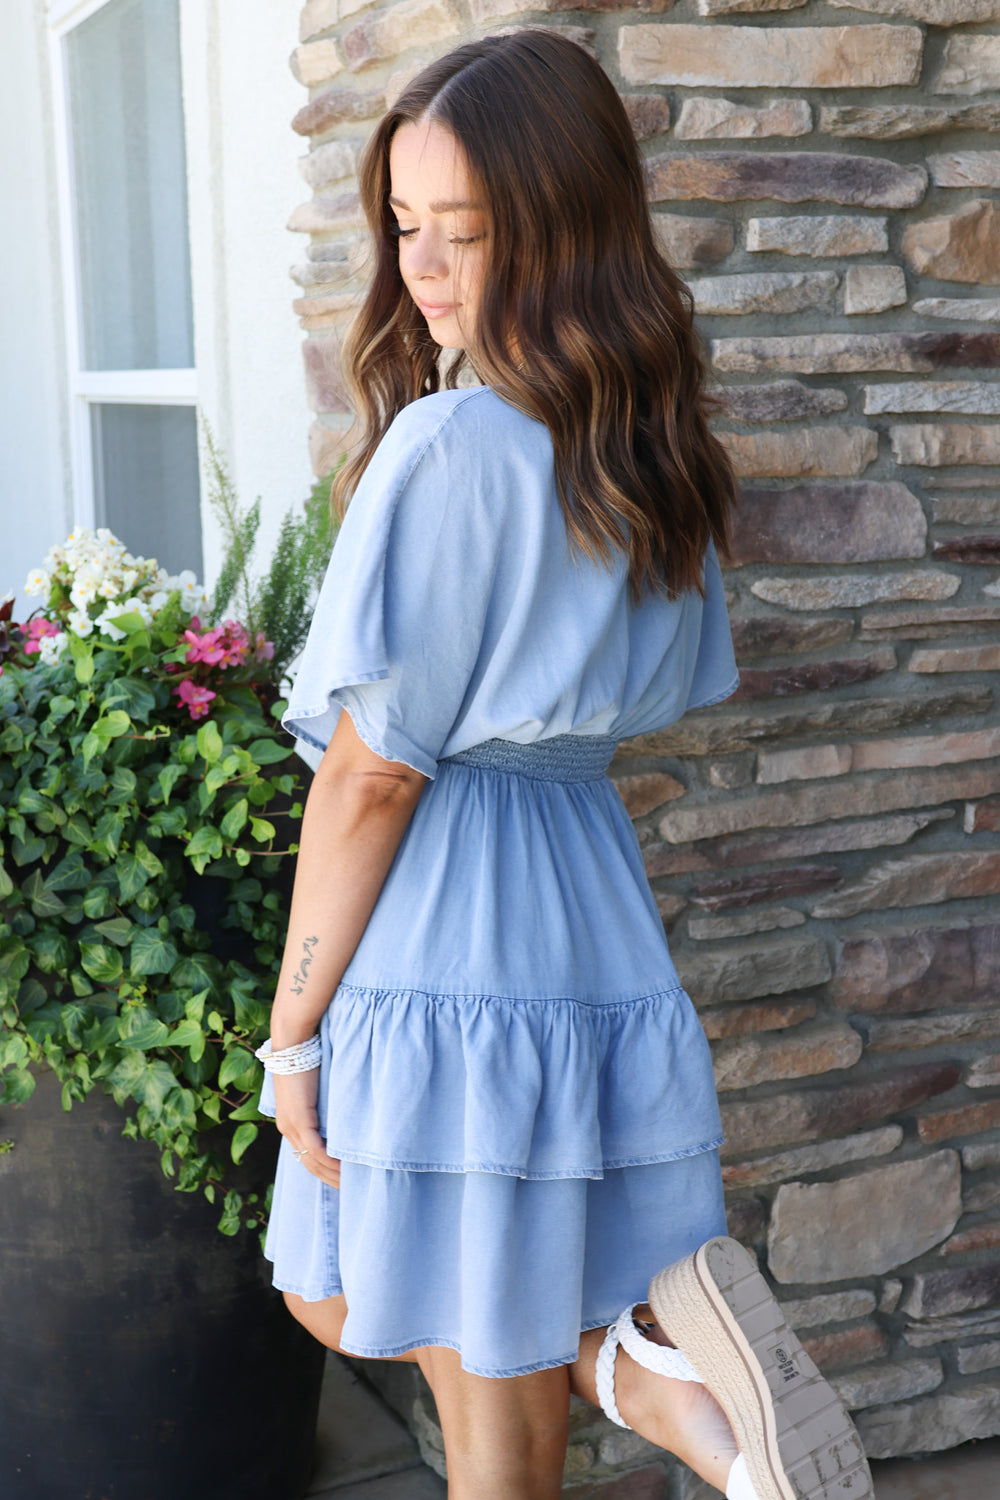 Ruffled Up In Love Dress - ShopSpoiled